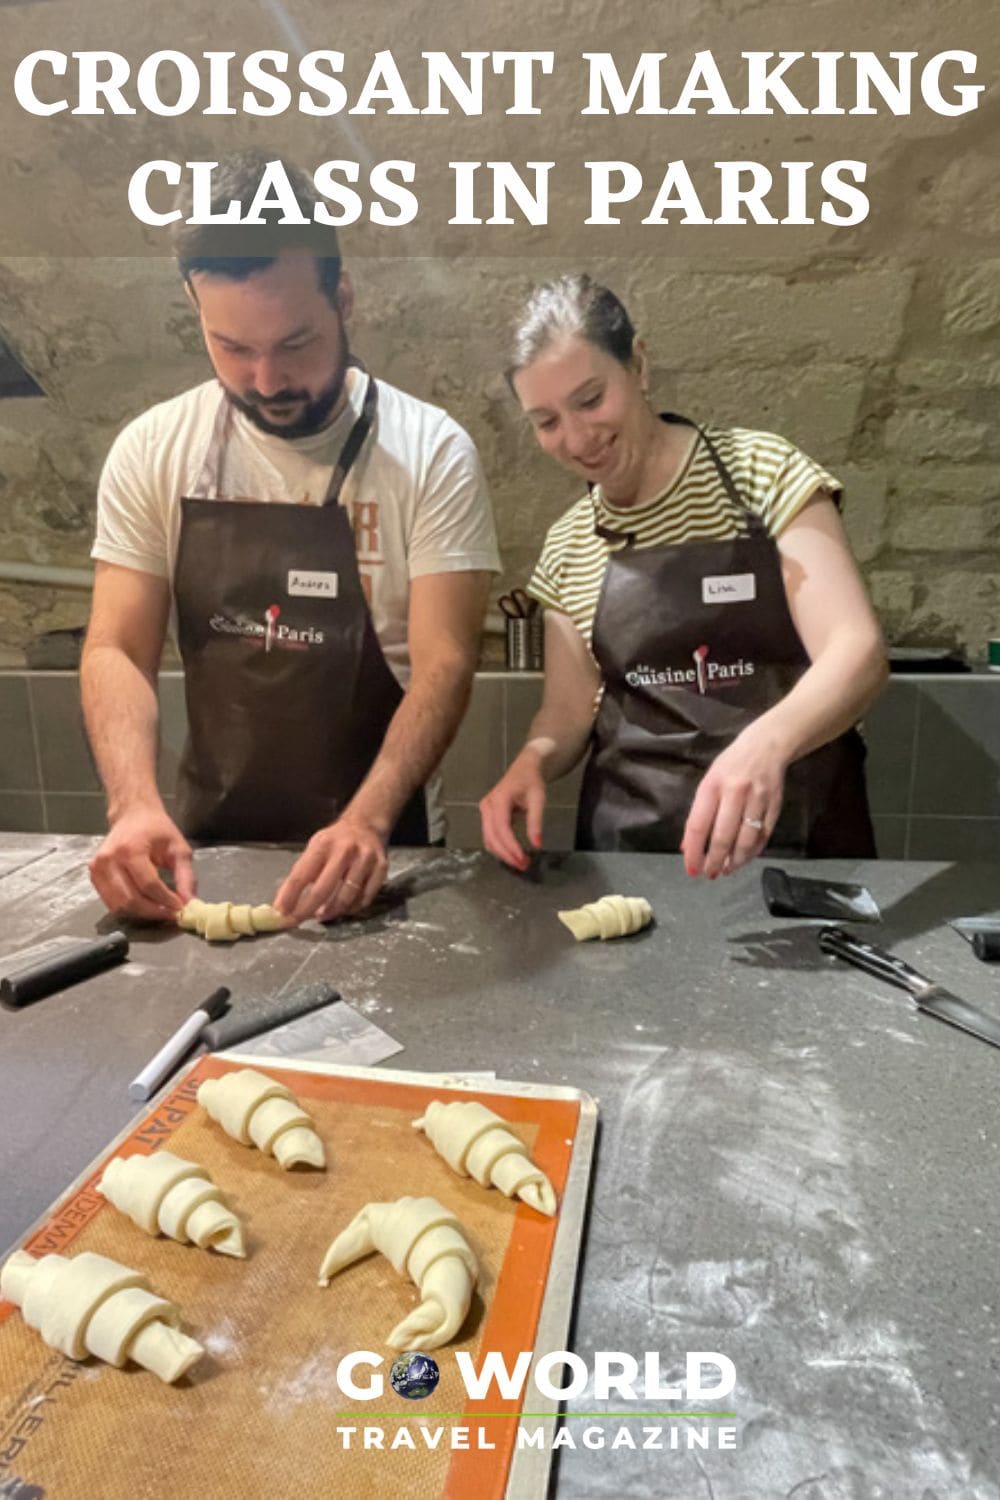 Learn how to make some of France's most iconic and delicous baked treats with a croissant making class in Paris. #Paris #Pariscookingclass